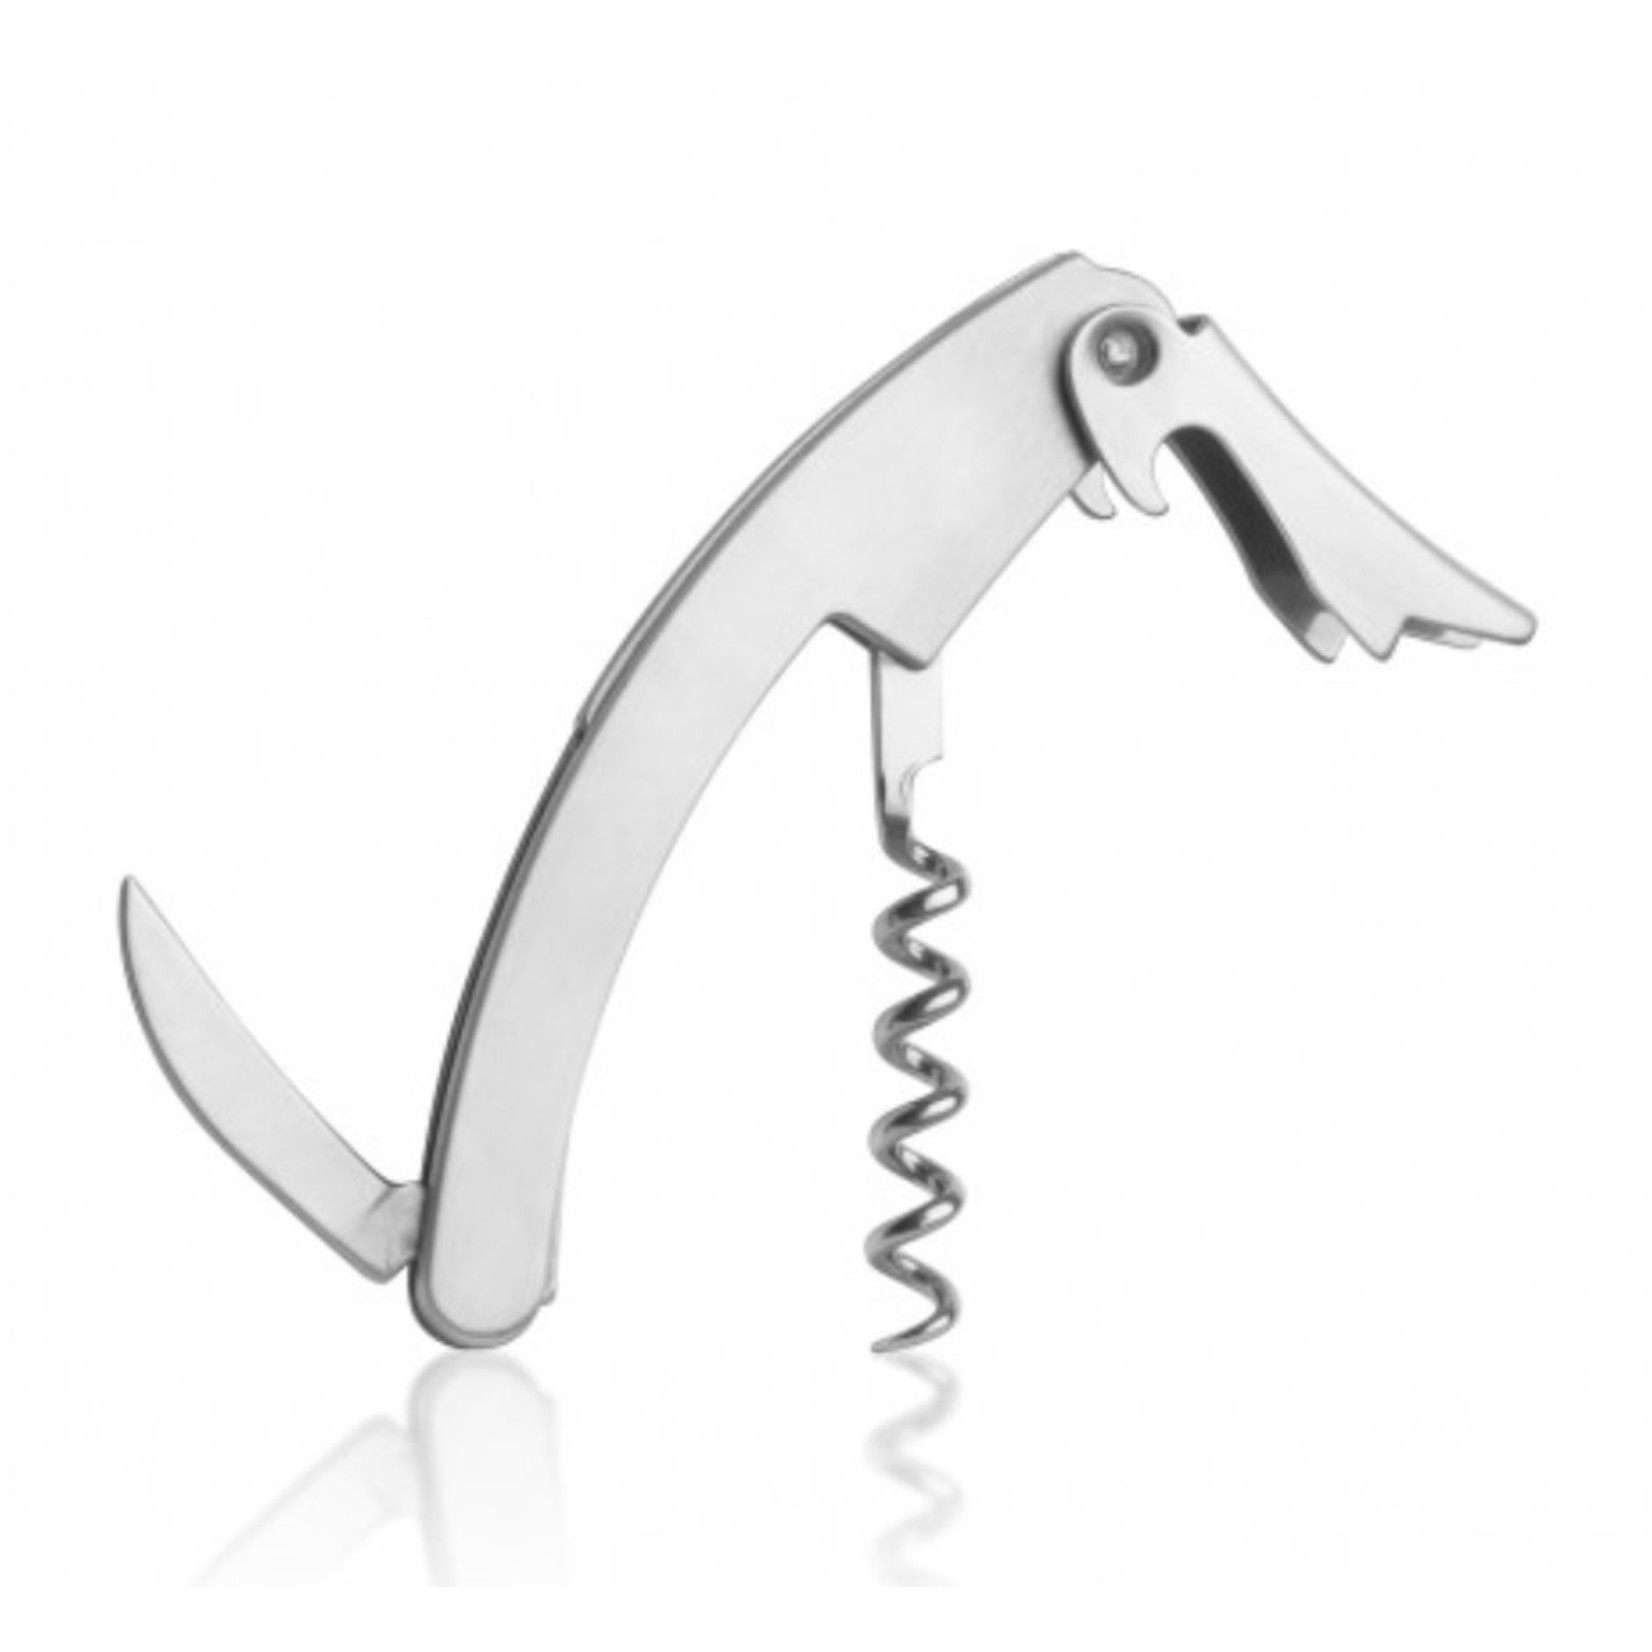 FINAL TOUCH FINAL TOUCH Stainless Steel Waiters Friend Corkscrew